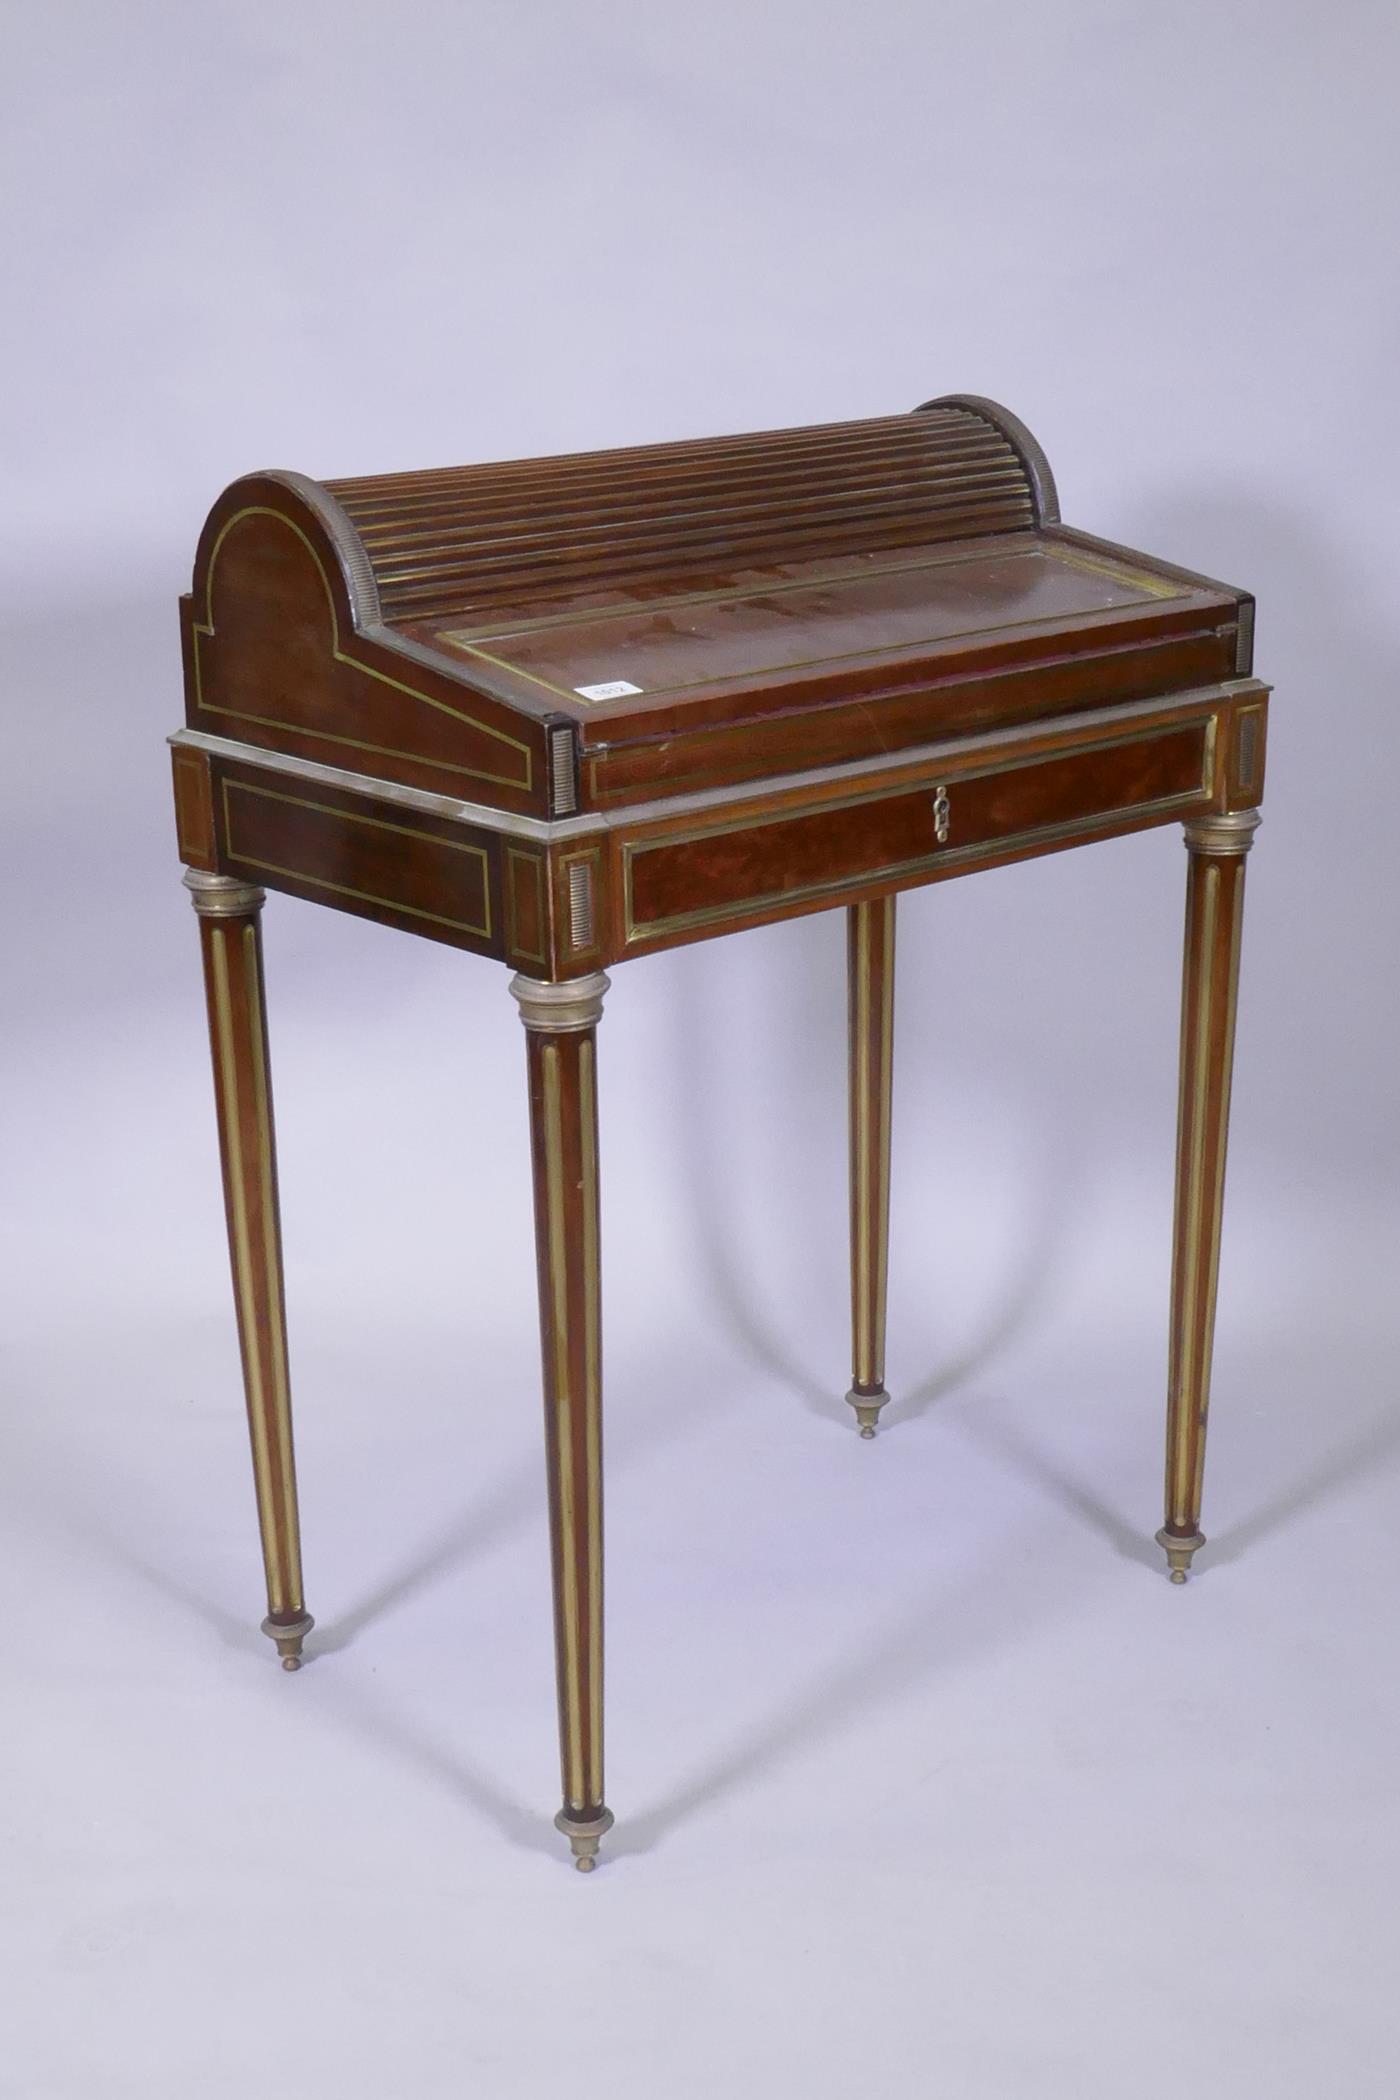 A French mahogany bonne heure du jour, with brass mounts, the pull out drawer operating the - Image 5 of 5